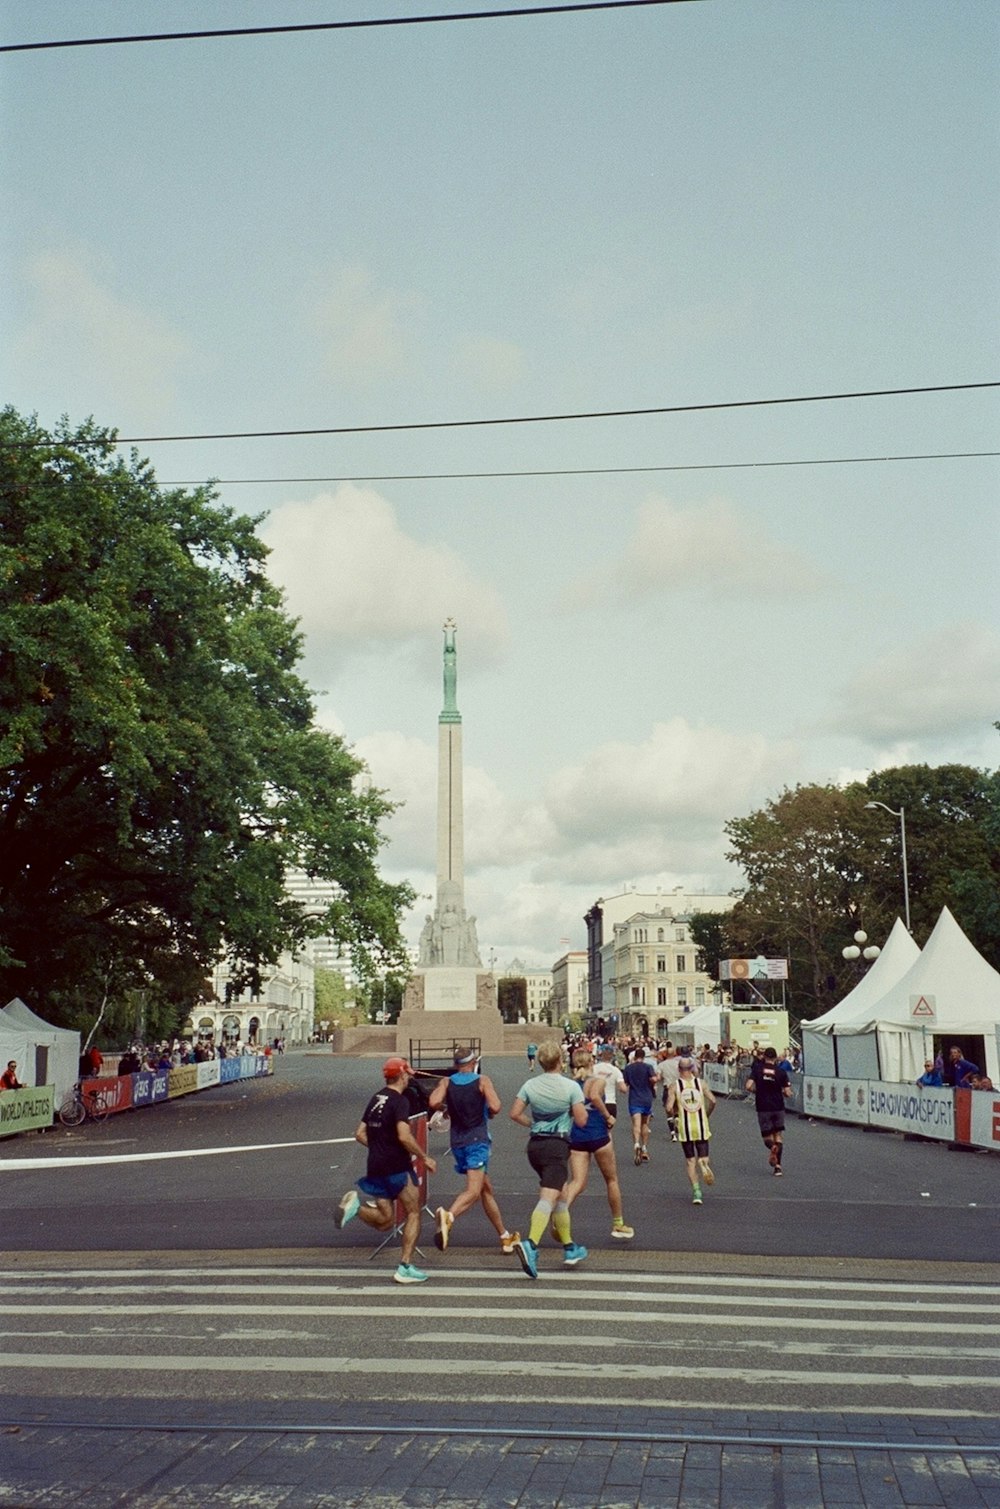 a group of people crossing a street in front of a monument